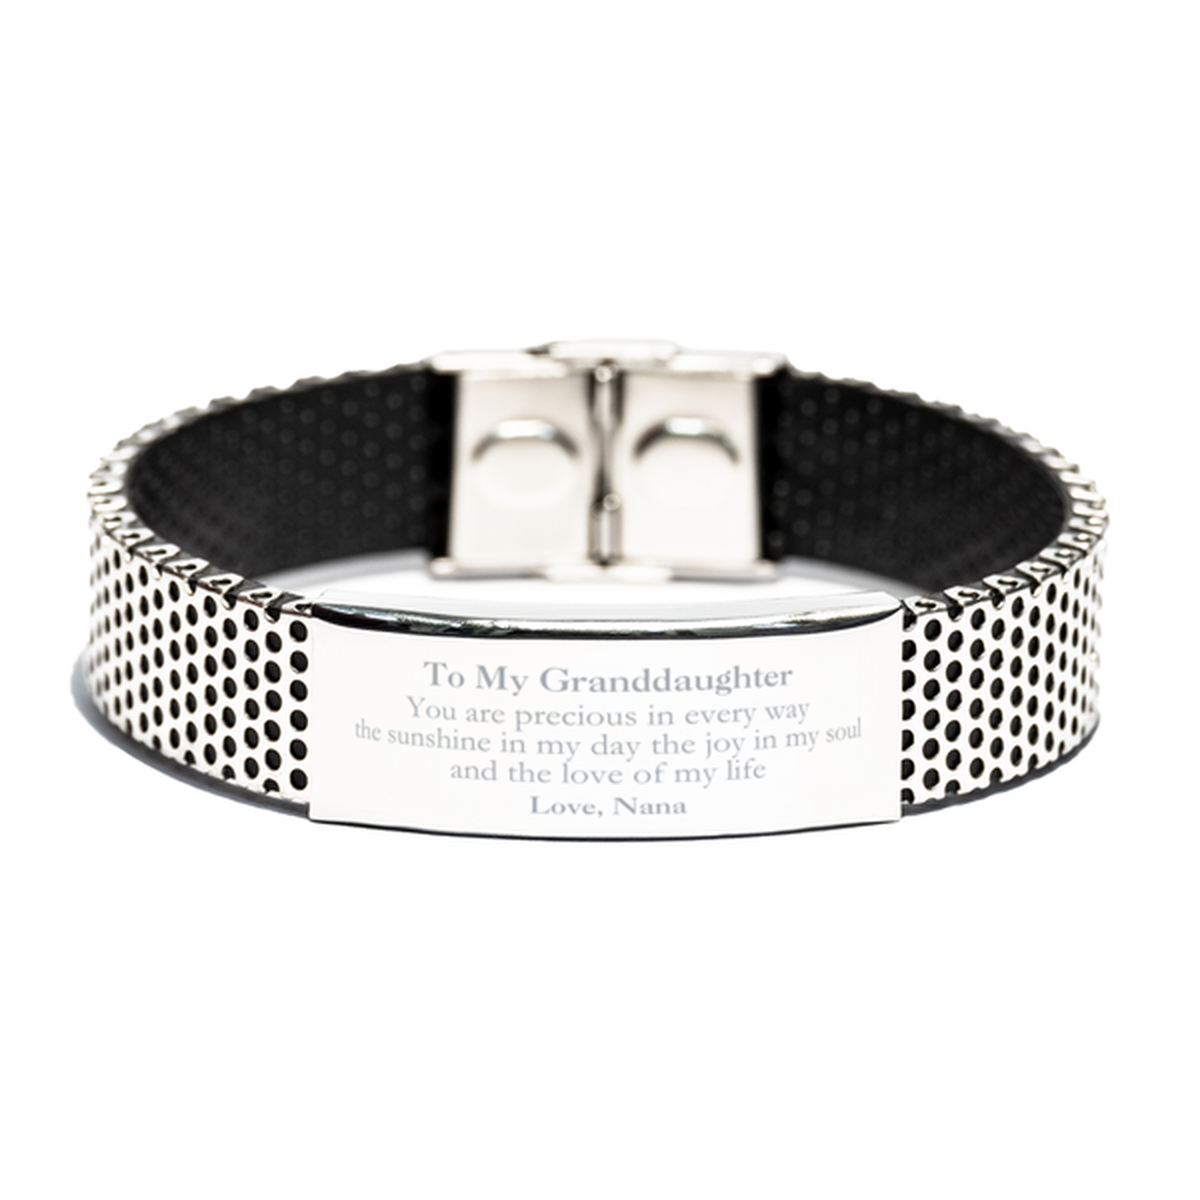 Graduation Gifts for Granddaughter Stainless Steel Bracelet Present from Nana, Christmas Granddaughter Birthday Gifts Granddaughter You are precious in every way the sunshine in my day. Love, Nana